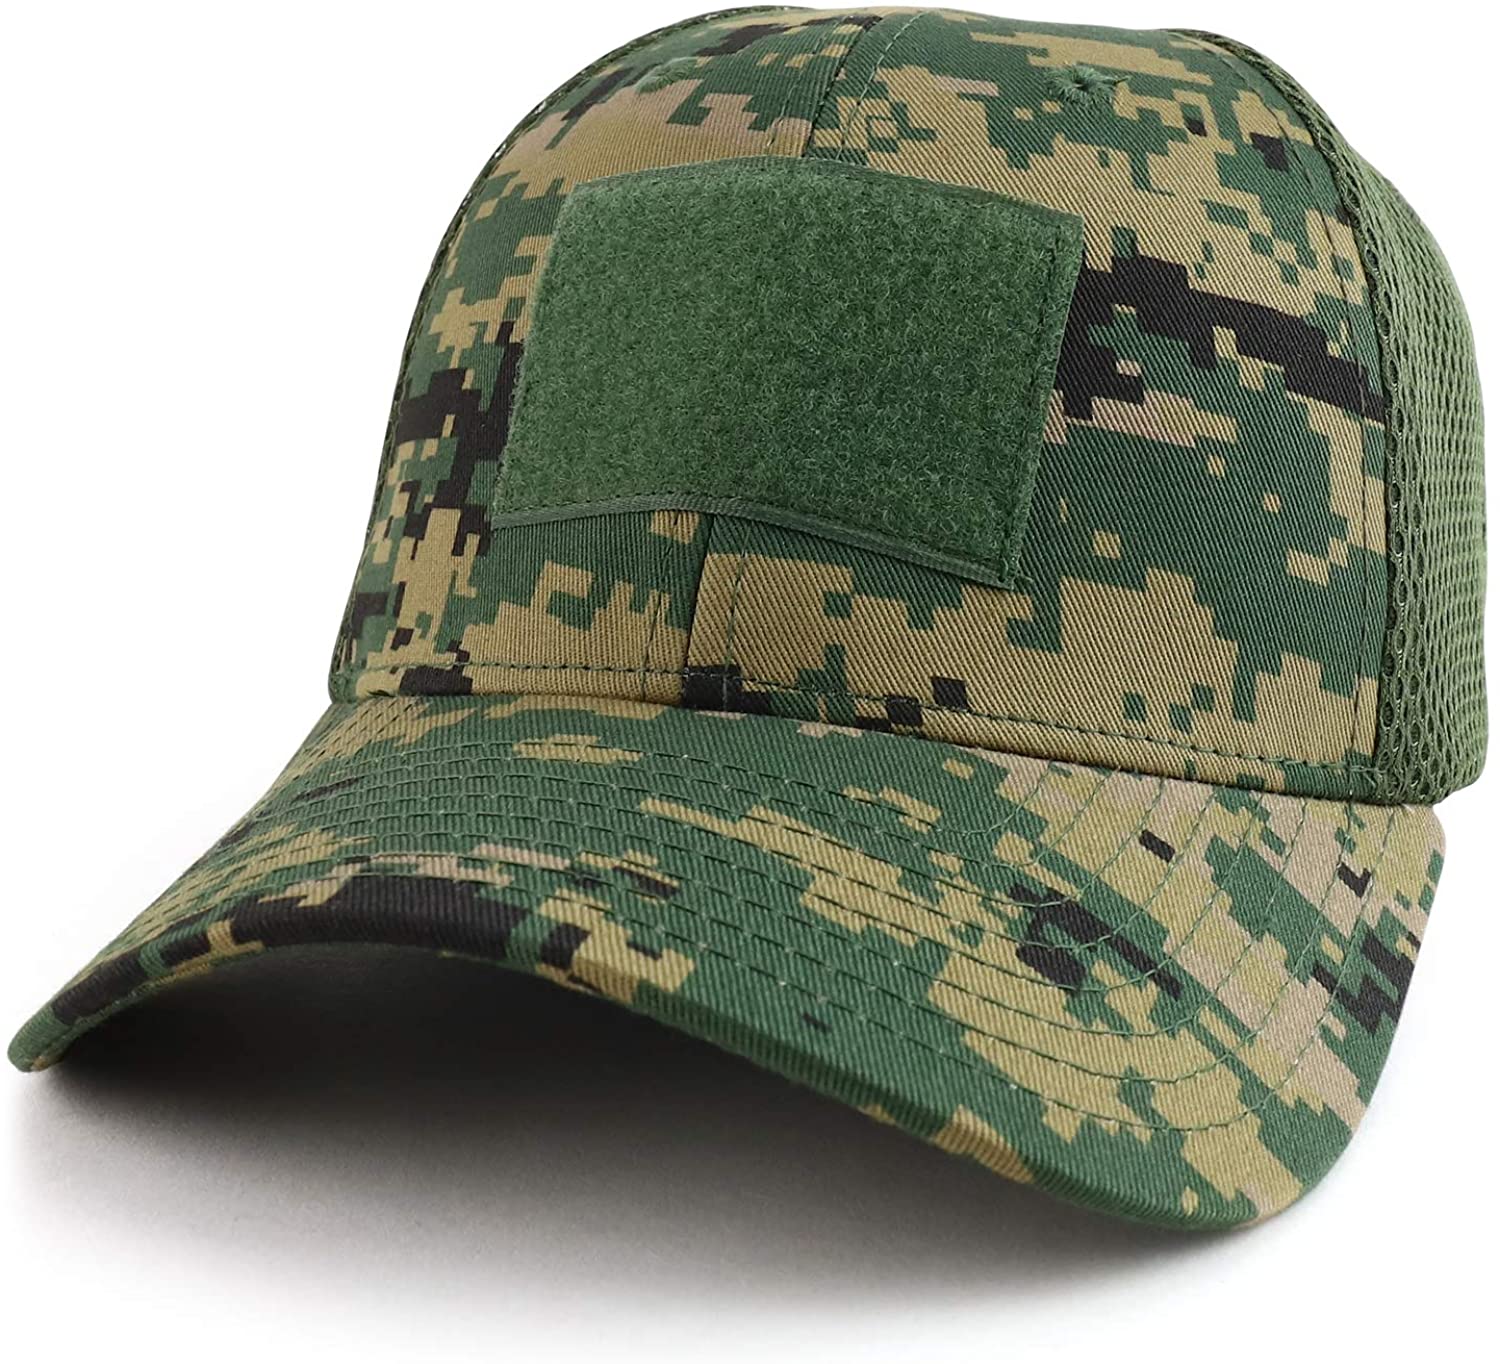 Rapid Dominance Tactical Low Crown Flex Fitting Mesh Back Cap - Coyote